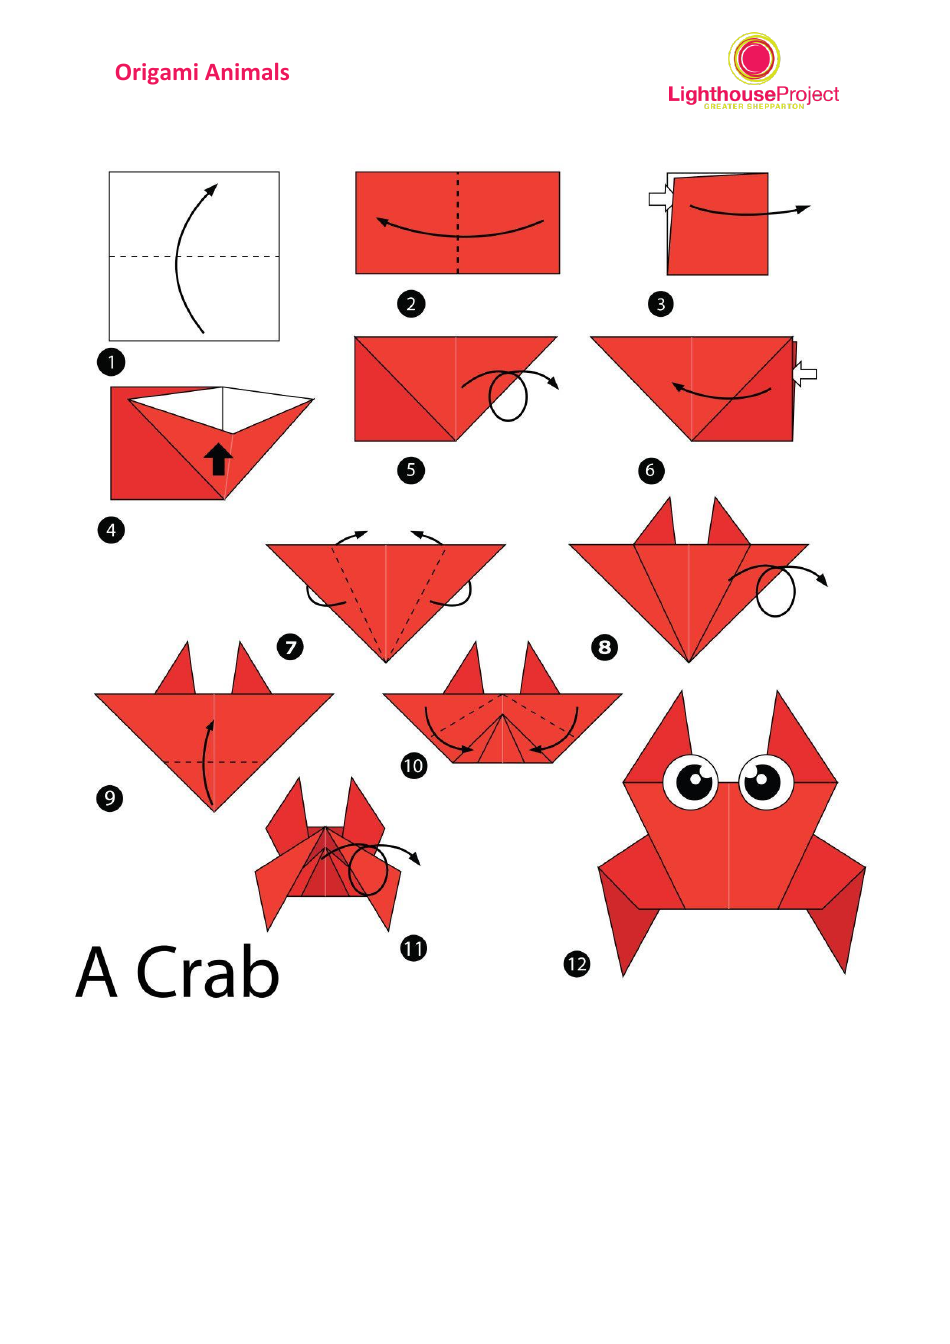 Origami Animals Guide, Page 1